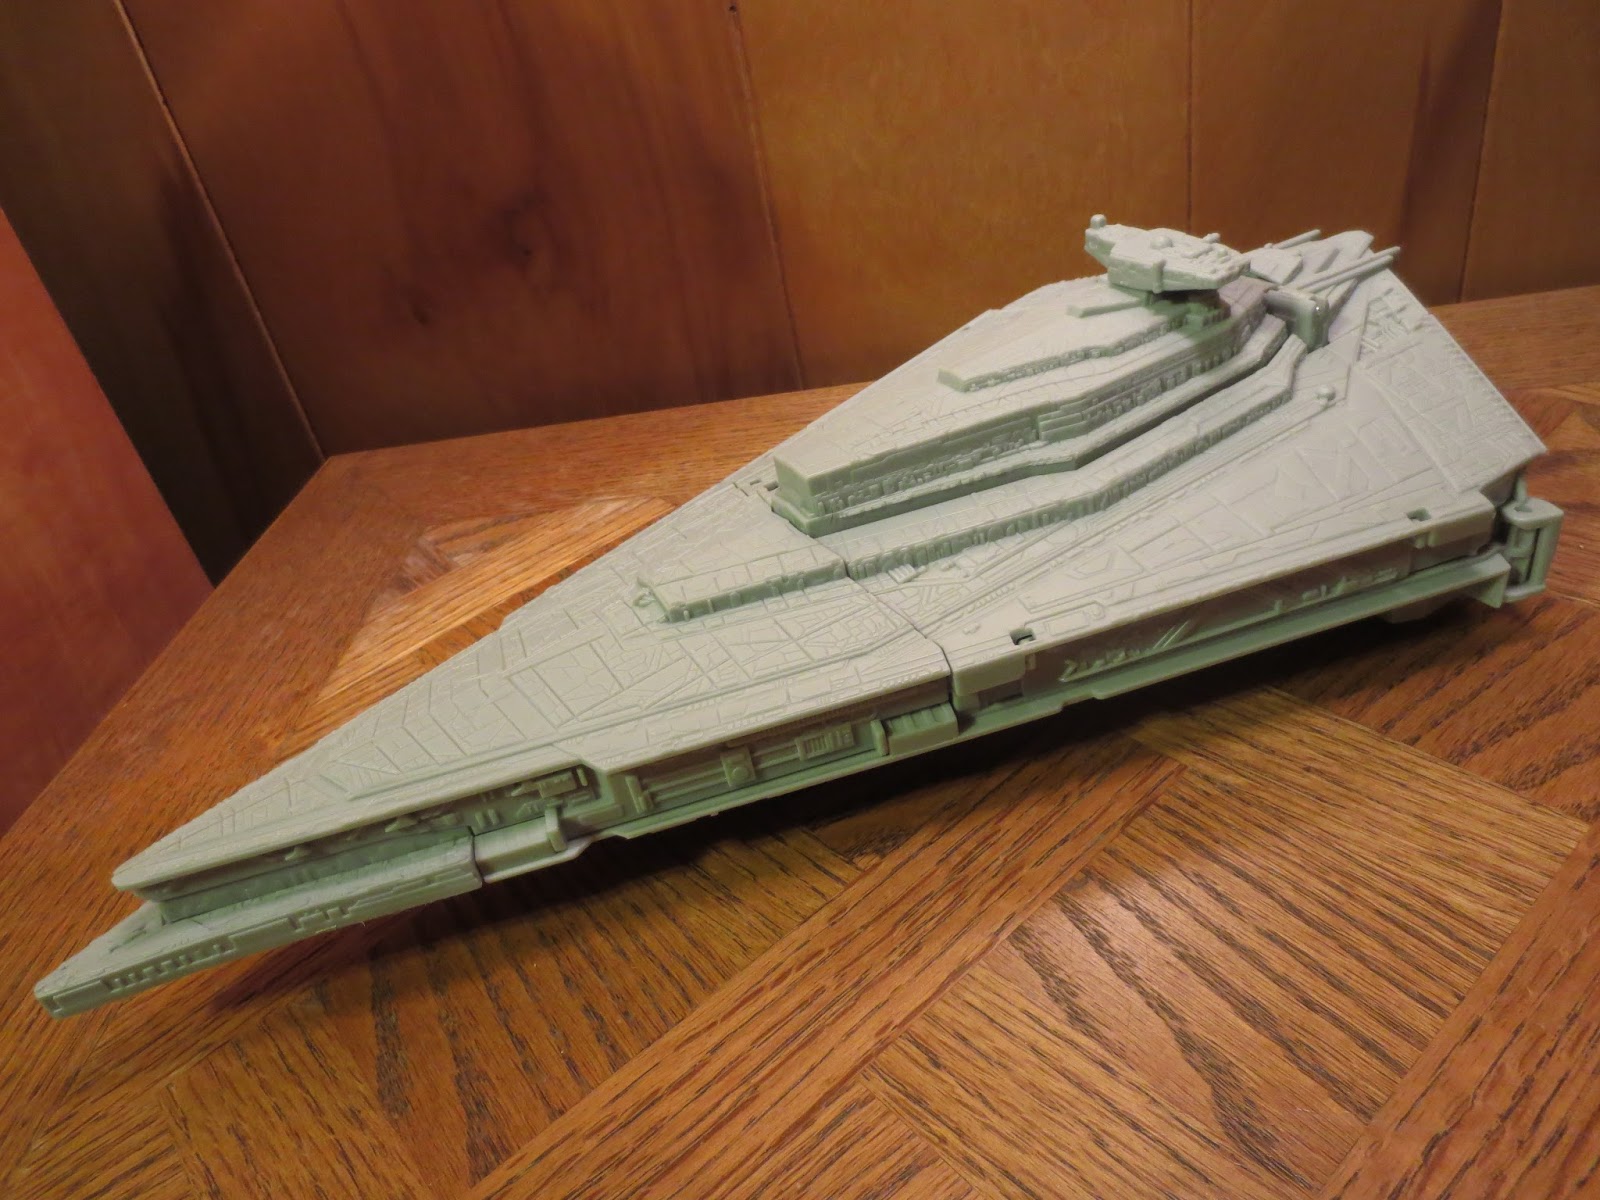 Star Wars Micro Machines First order The Force Awakens star destroyer 